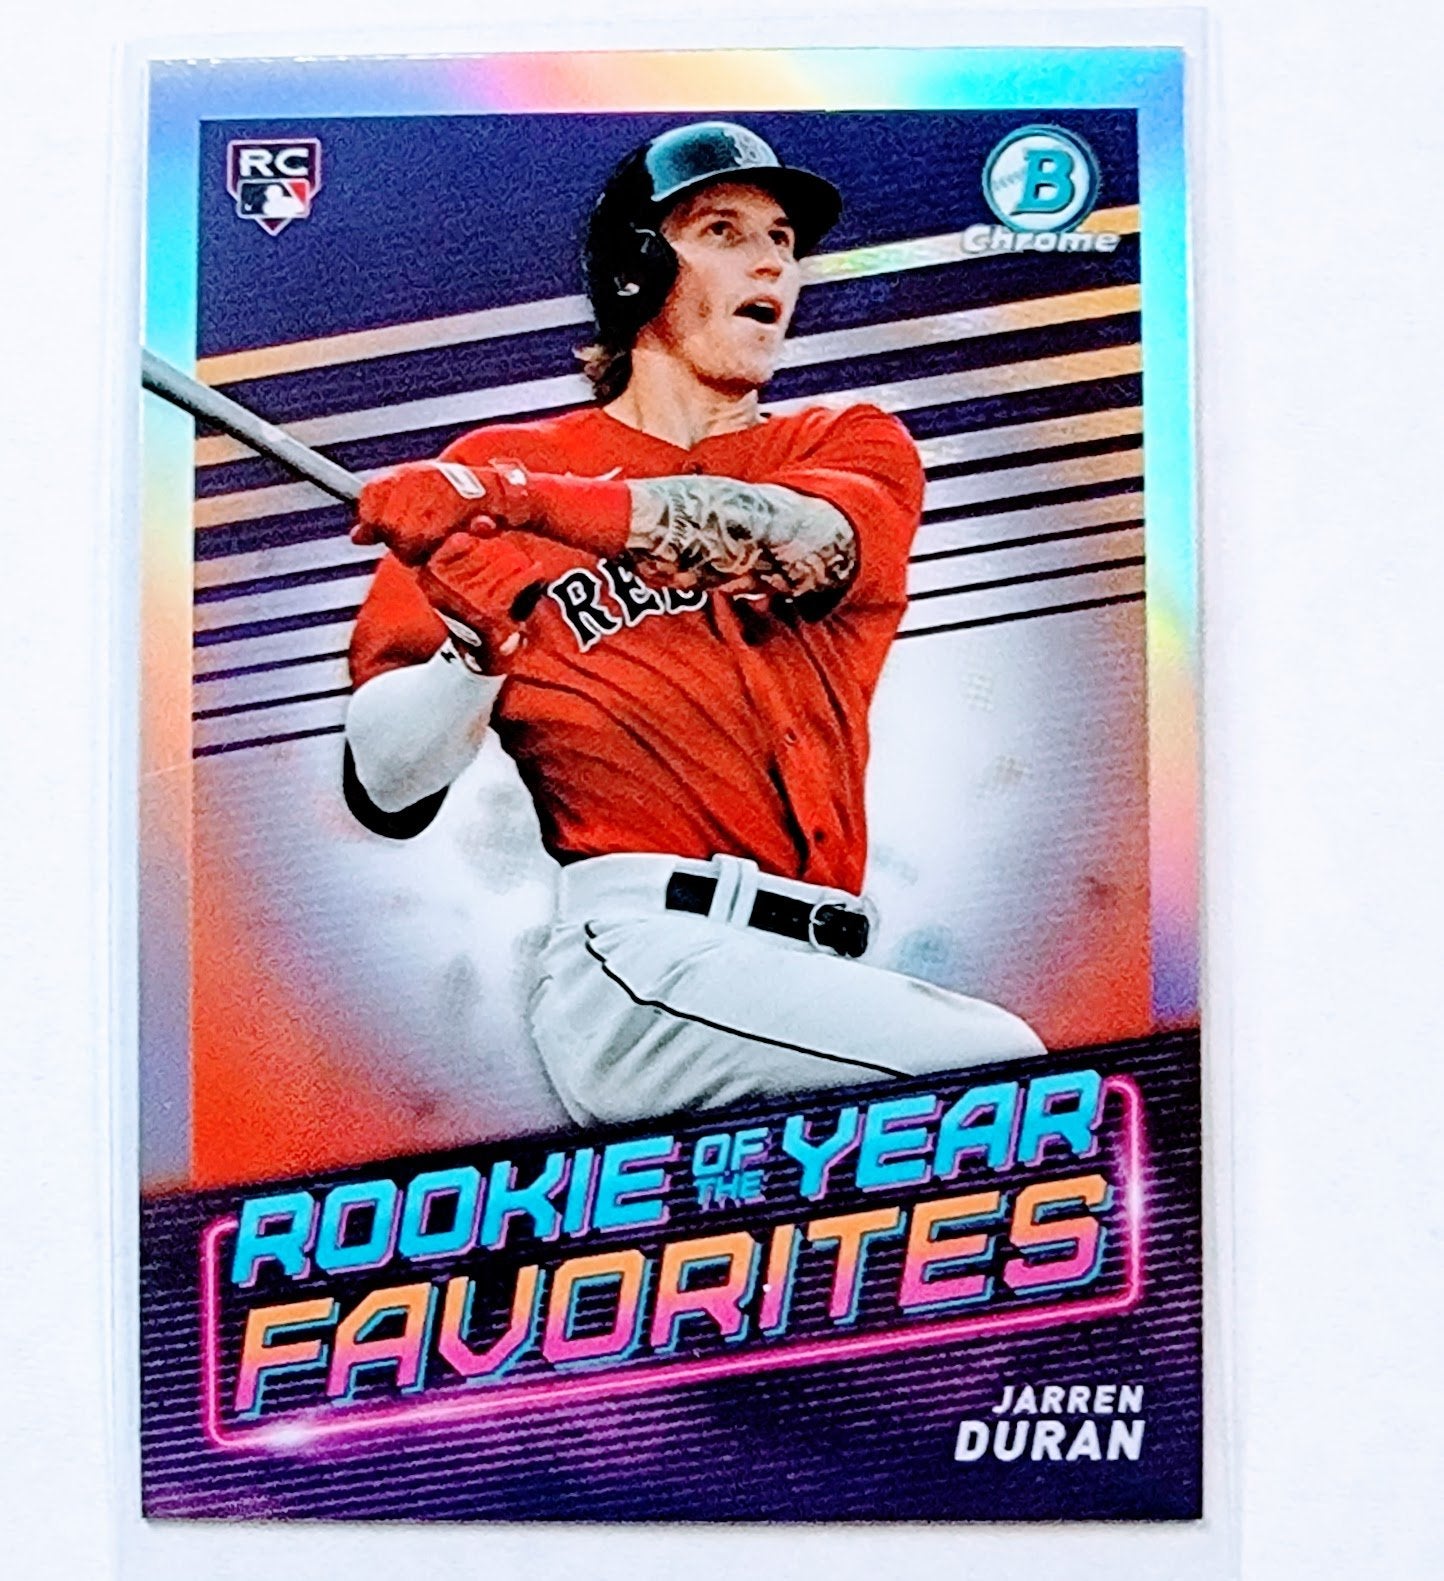 2022 Bowman Chrome Jarren Durran Mega Box Rookie of the Year Favorites Refractor Baseball Card AVM1 simple Xclusive Collectibles   